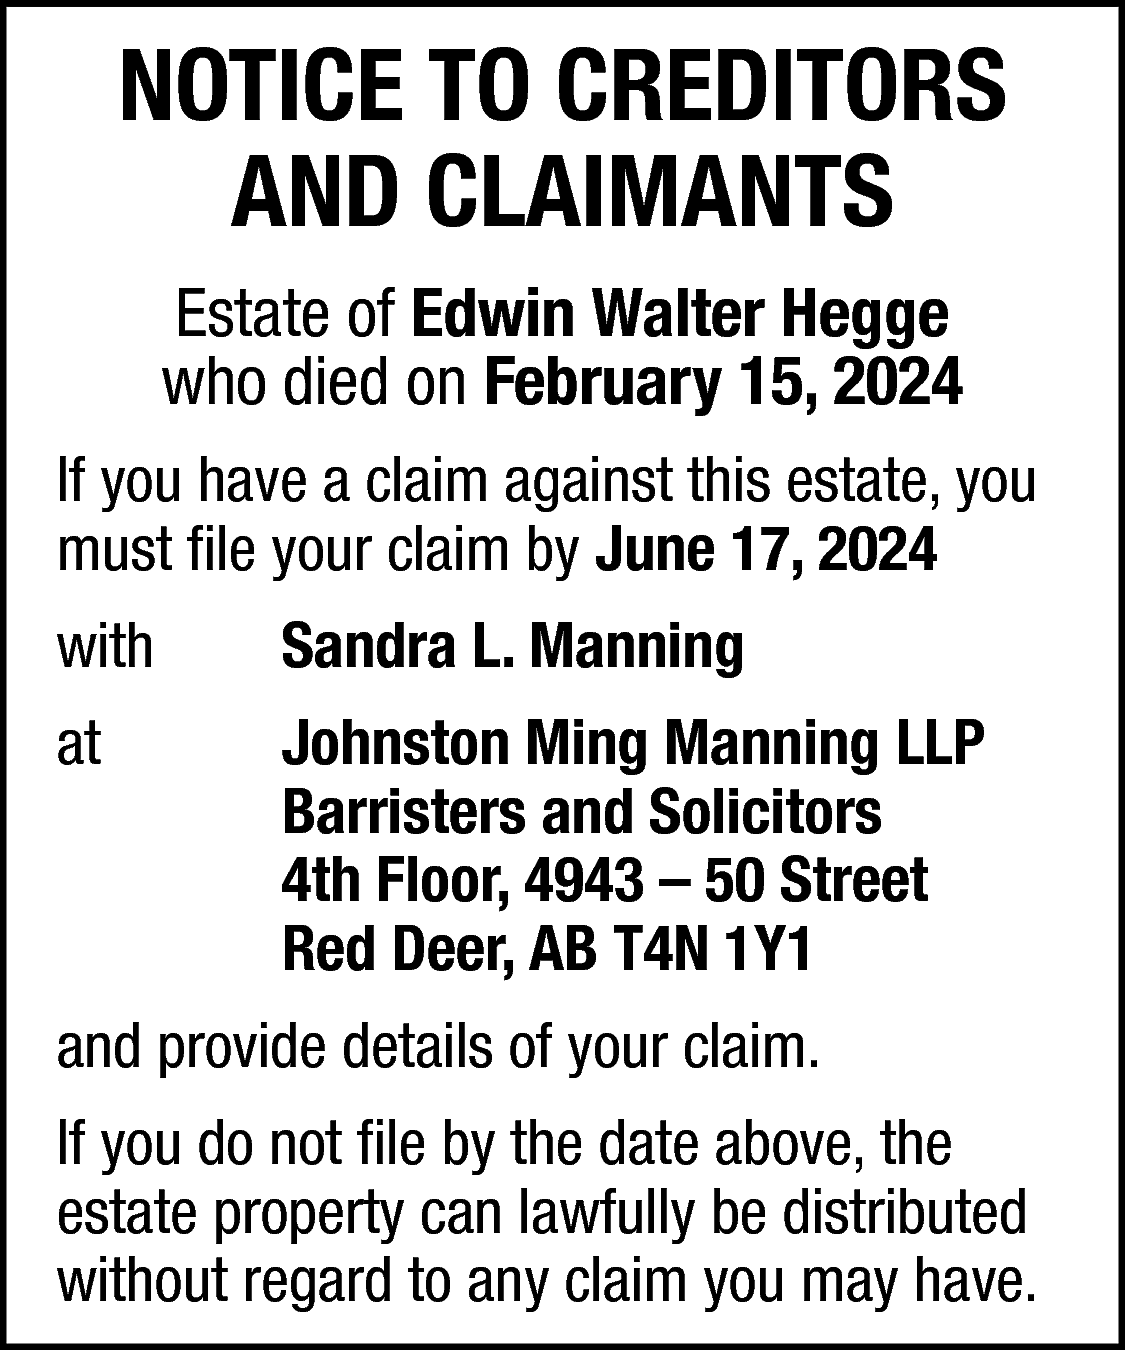 NOTICE TO CREDITORS <br>AND CLAIMANTS  NOTICE TO CREDITORS  AND CLAIMANTS  Estate of Edwin Walter Hegge  who died on February 15, 2024  If you have a claim against this estate, you  must file your claim by June 17, 2024  with    Sandra L. Manning    at    Johnston Ming Manning LLP  Barristers and Solicitors  4th Floor, 4943 – 50 Street  Red Deer, AB T4N 1Y1    and provide details of your claim.  If you do not file by the date above, the  estate property can lawfully be distributed  without regard to any claim you may have.    